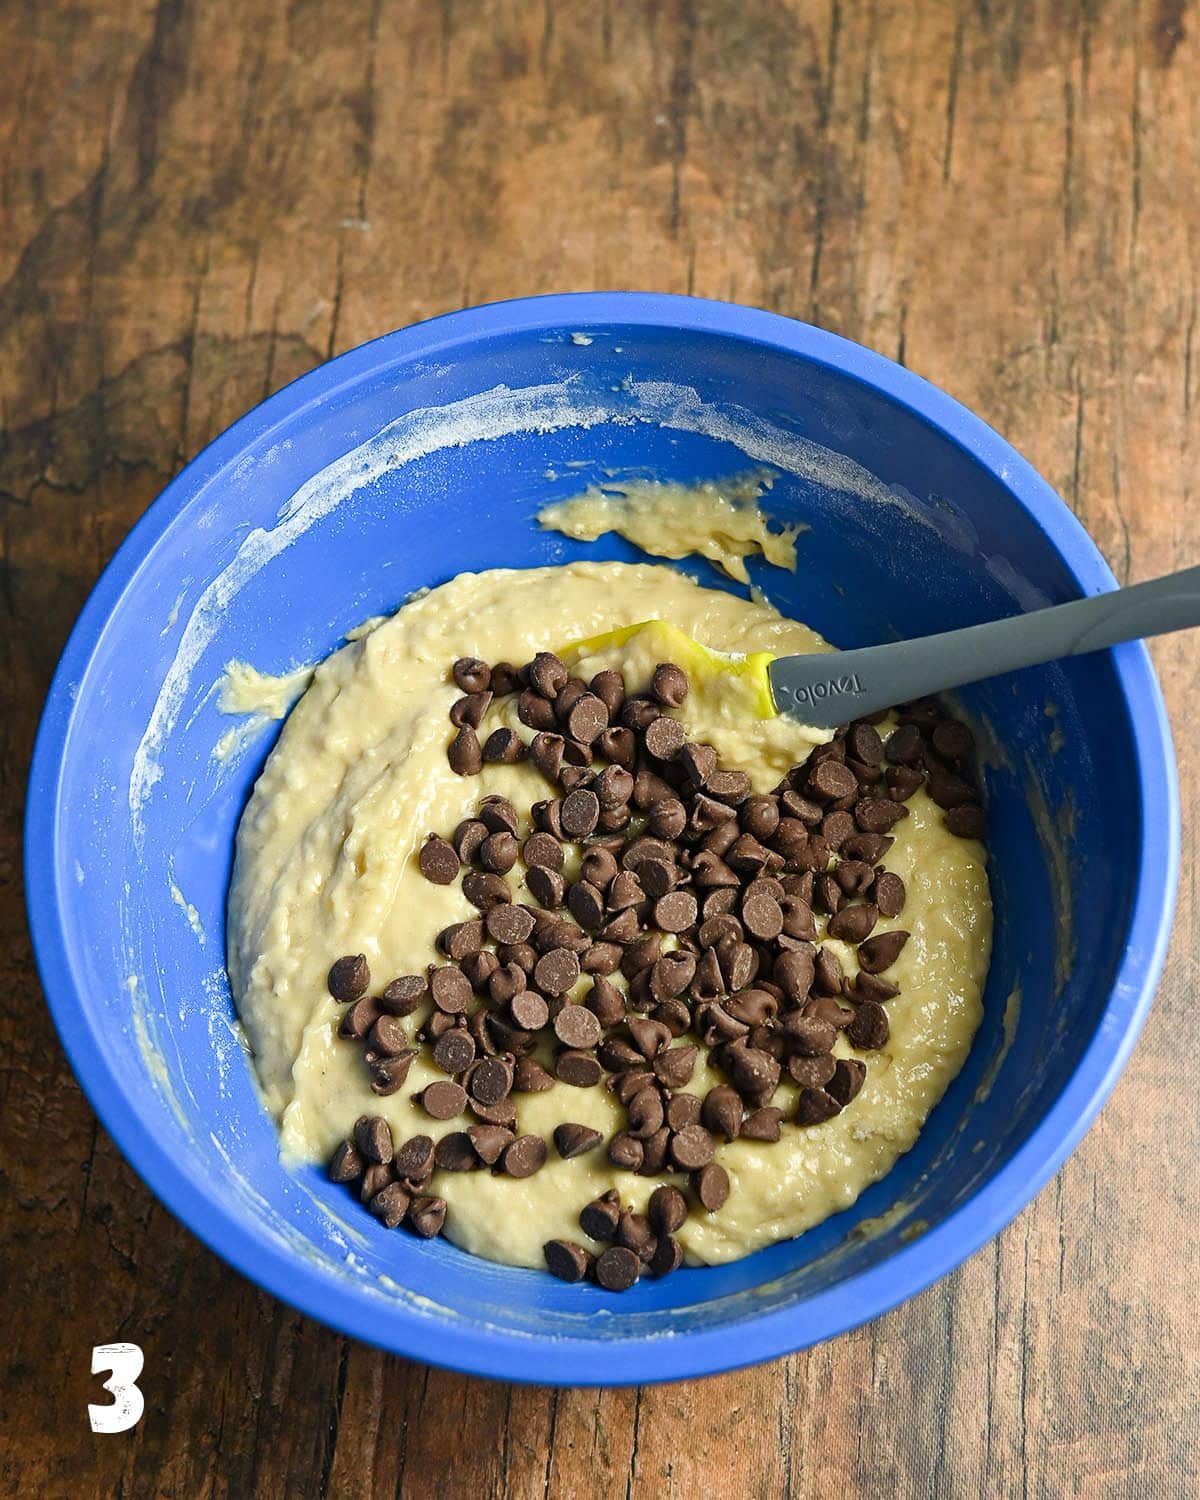 Chocolate chips added to muffin batter in a blue bowl.